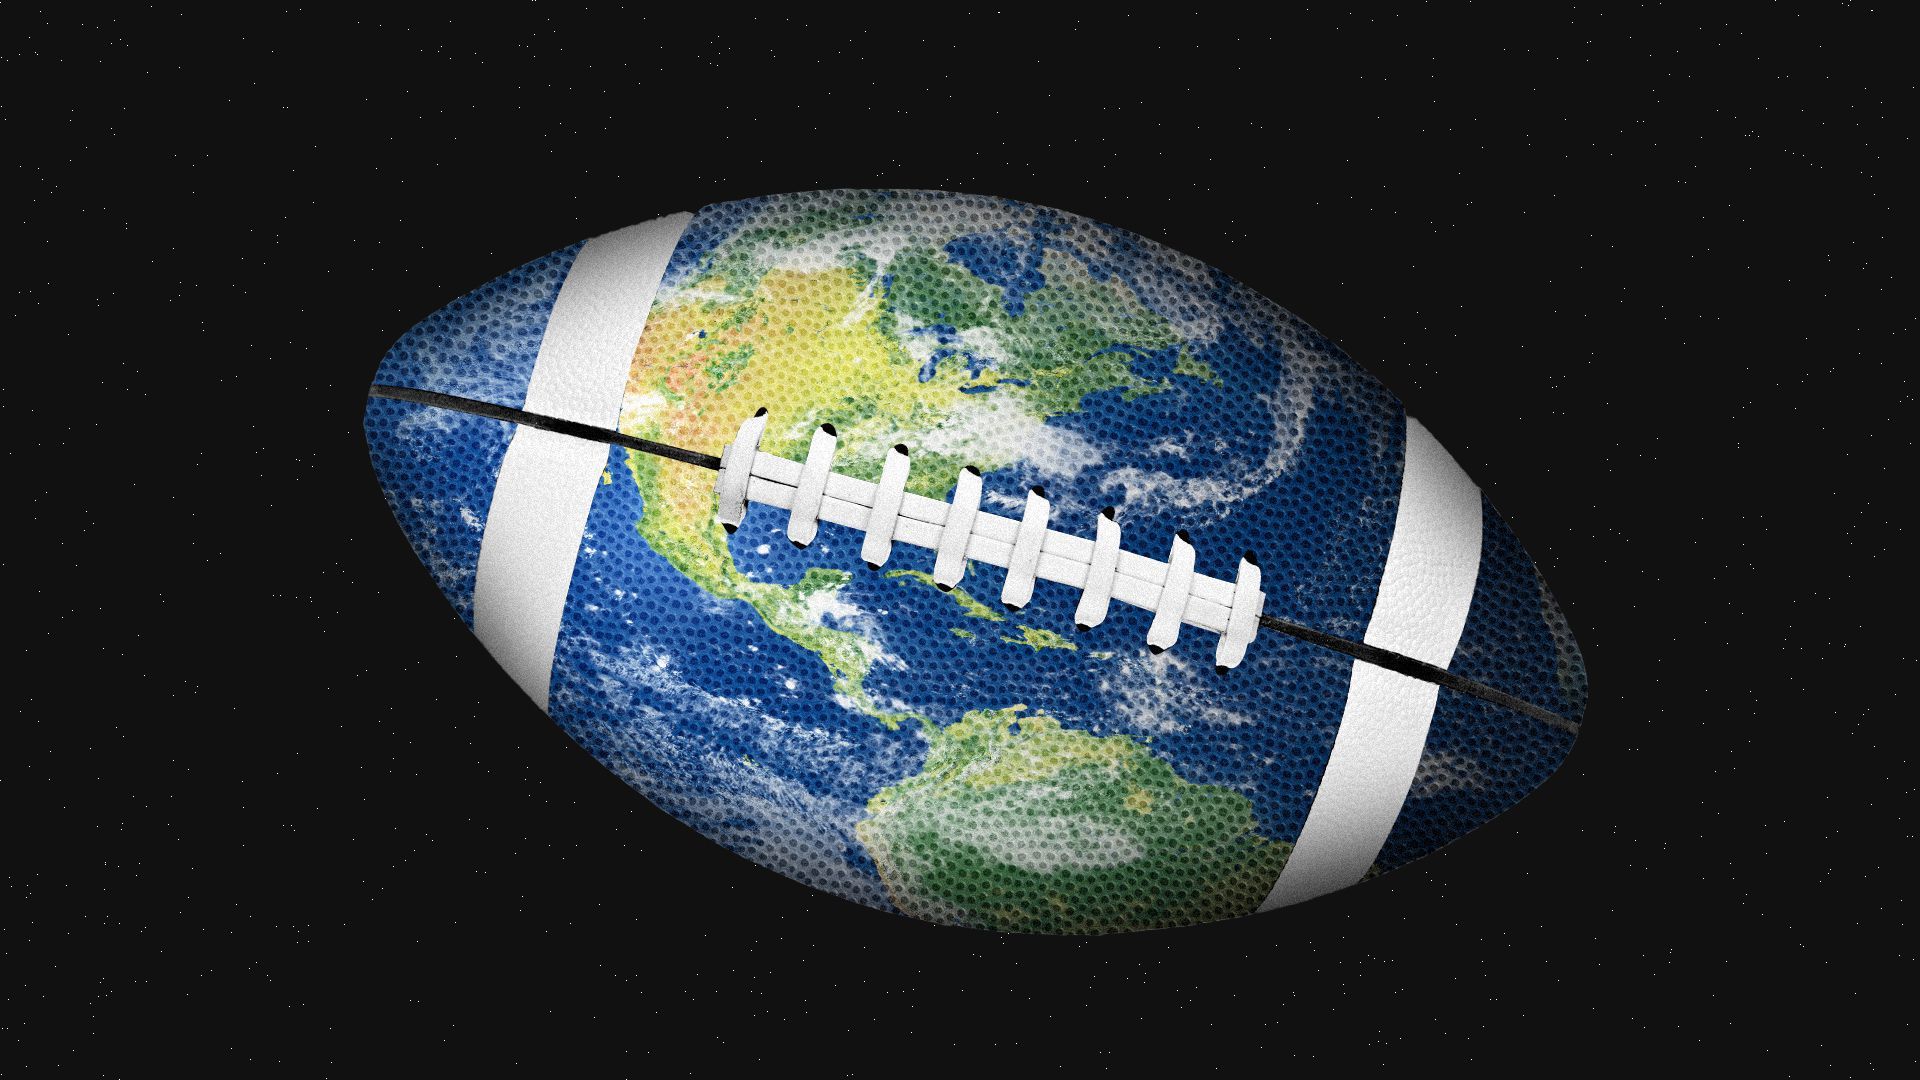 Illustration of the Earth in the shape of a football